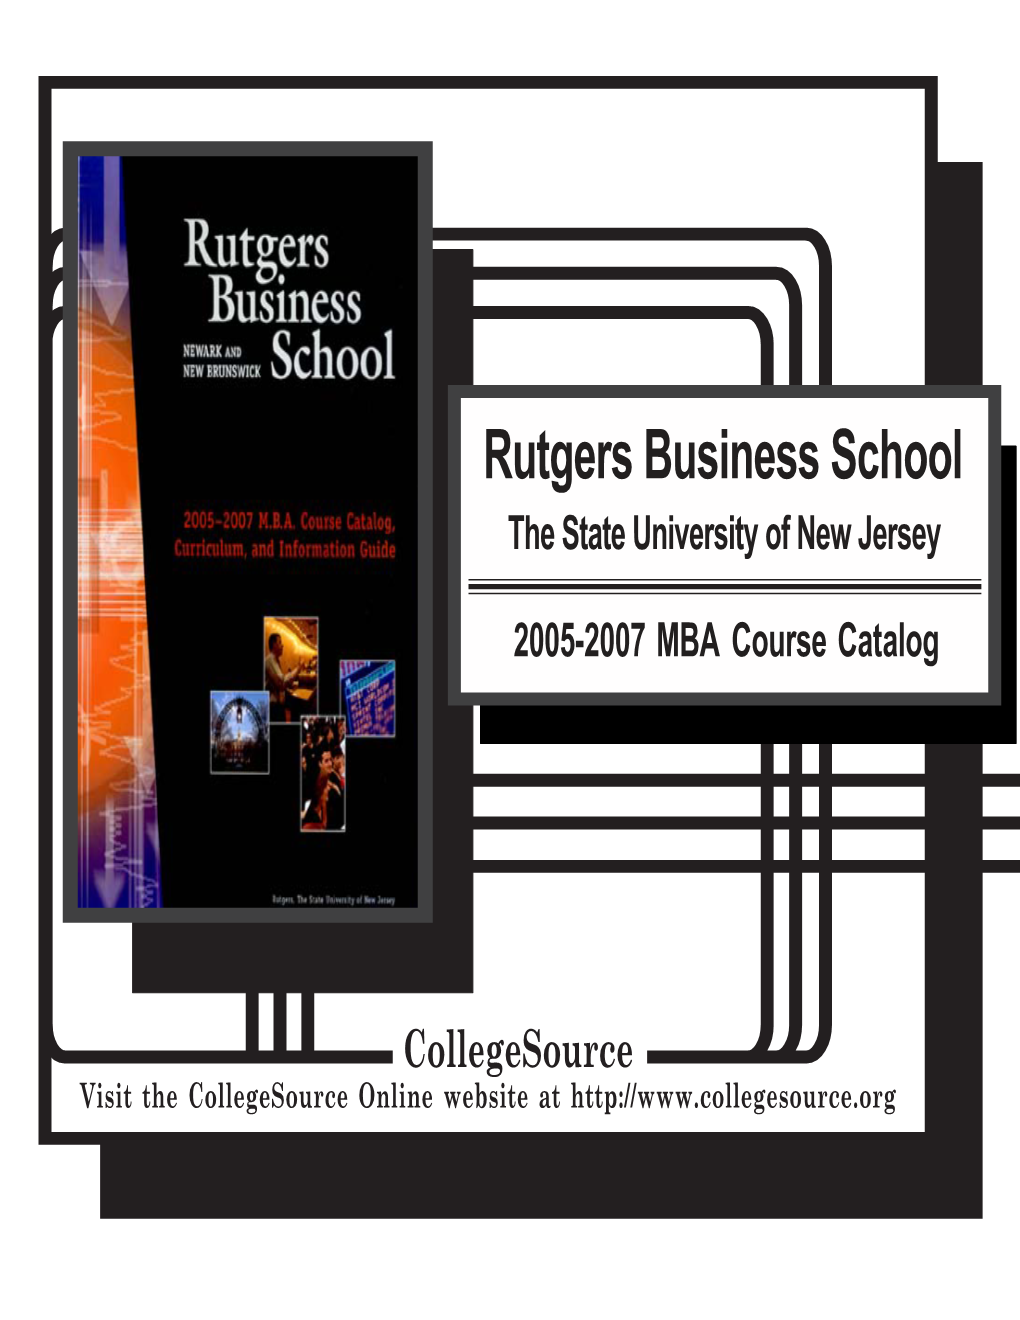 Rutgers Business School the State University of New Jersey